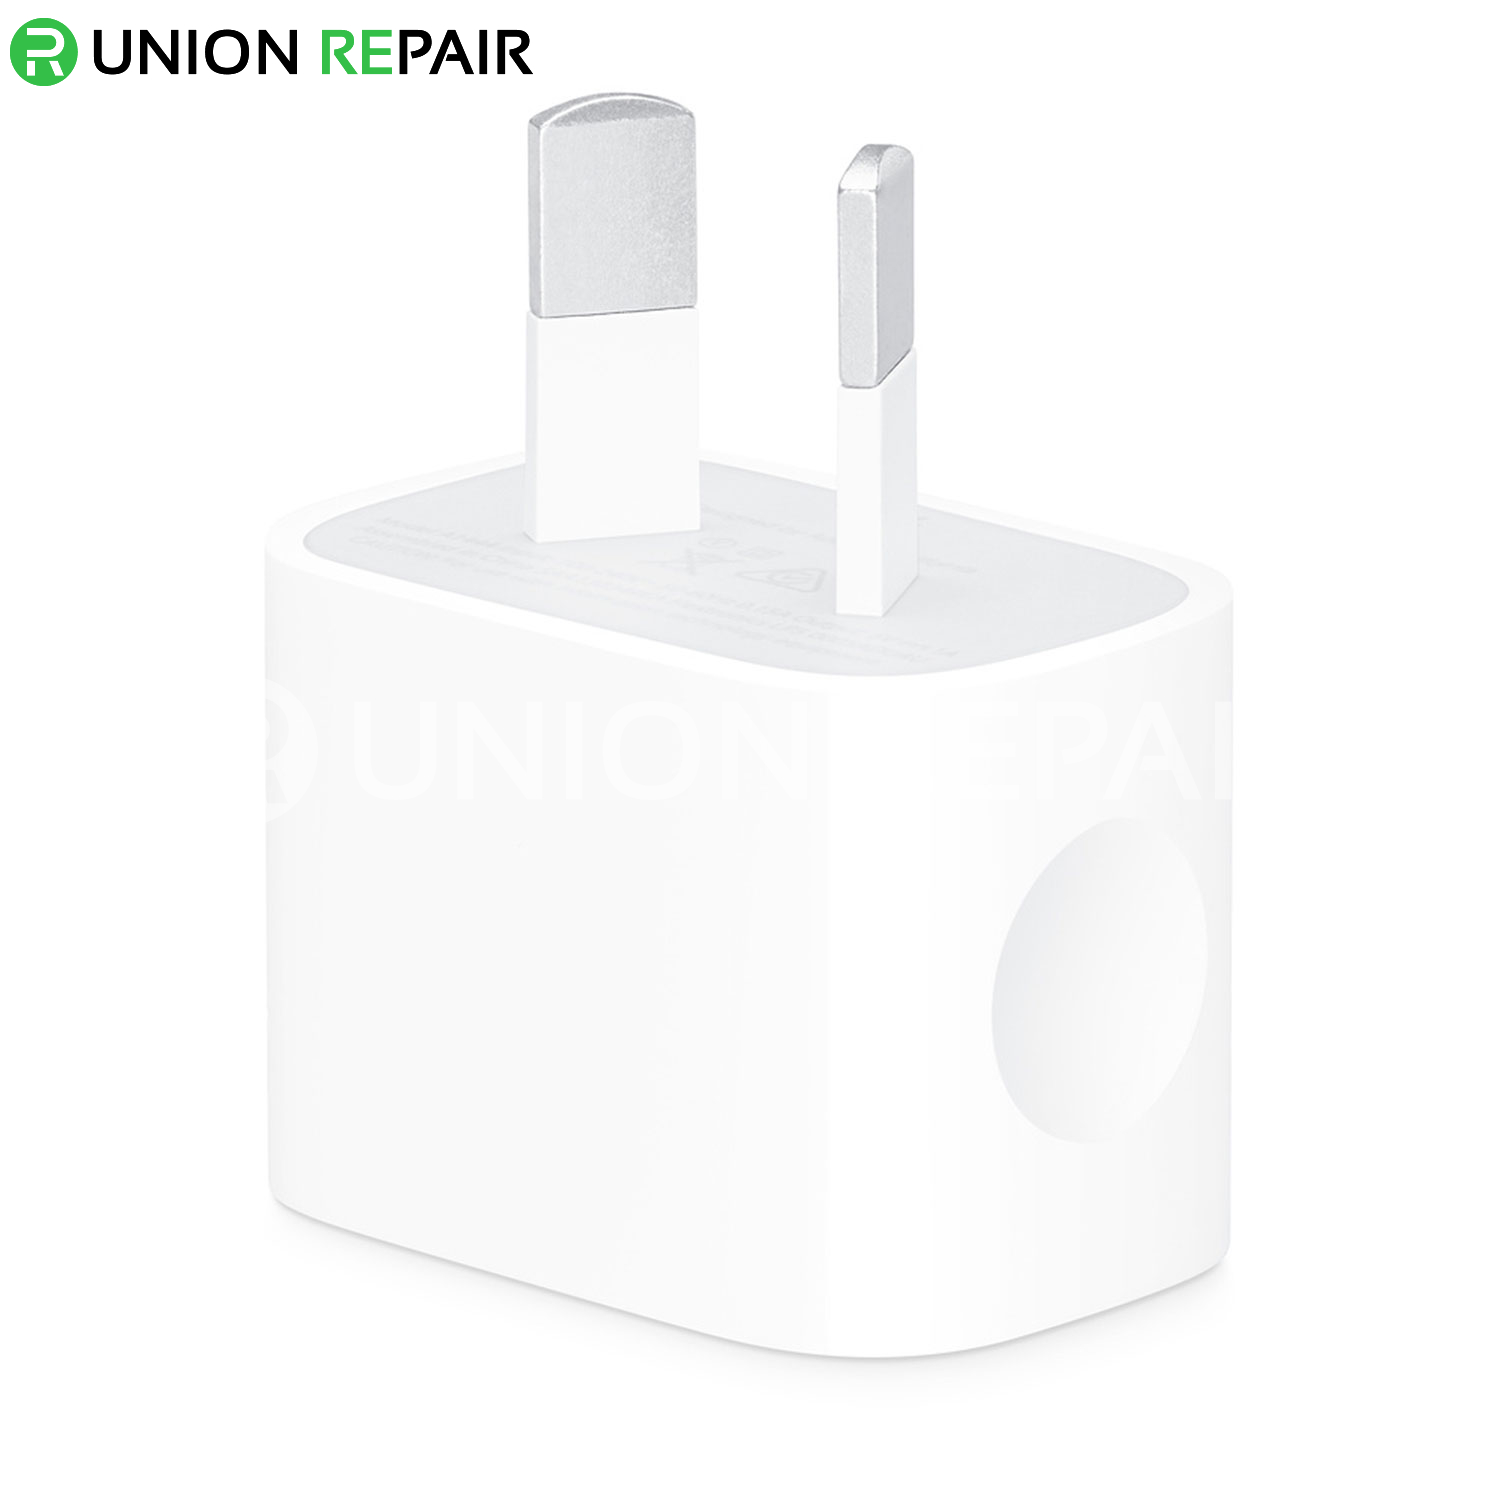 For iPhone 5W USB Power Adapter - AU Version